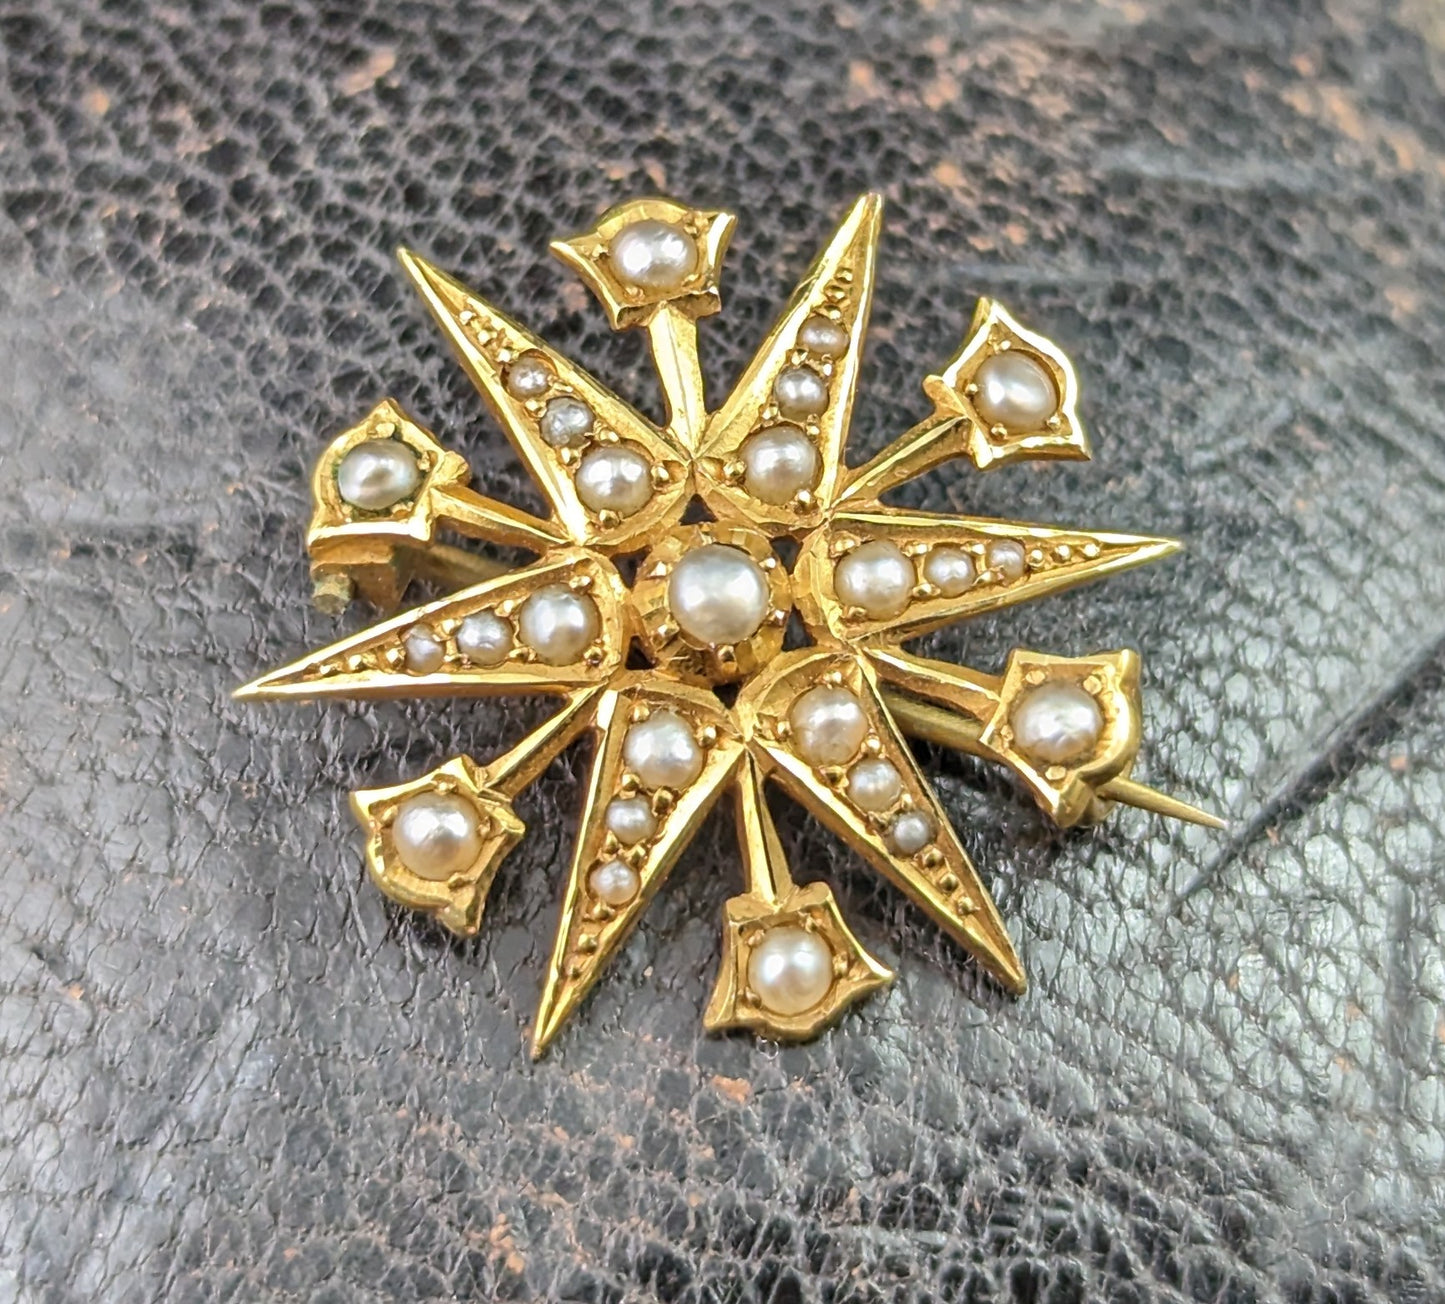 Antique Star brooch, 15ct yellow gold, Pearl, Starburst